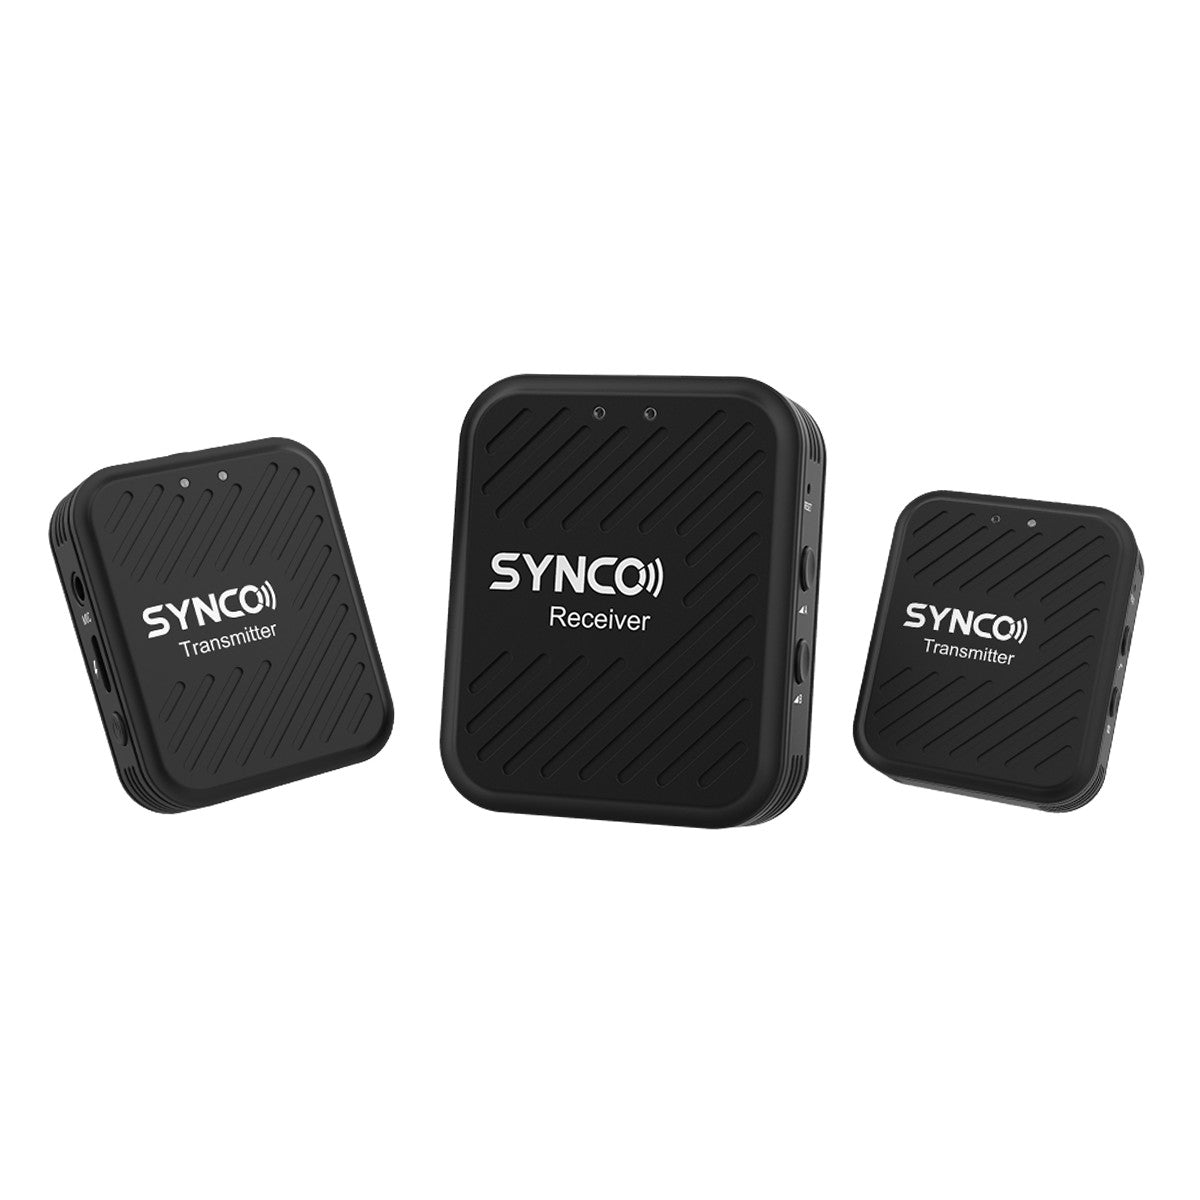 1-Trigger-2 Wireless Stereo Microphone at 2.4 GHz SYNCO G1